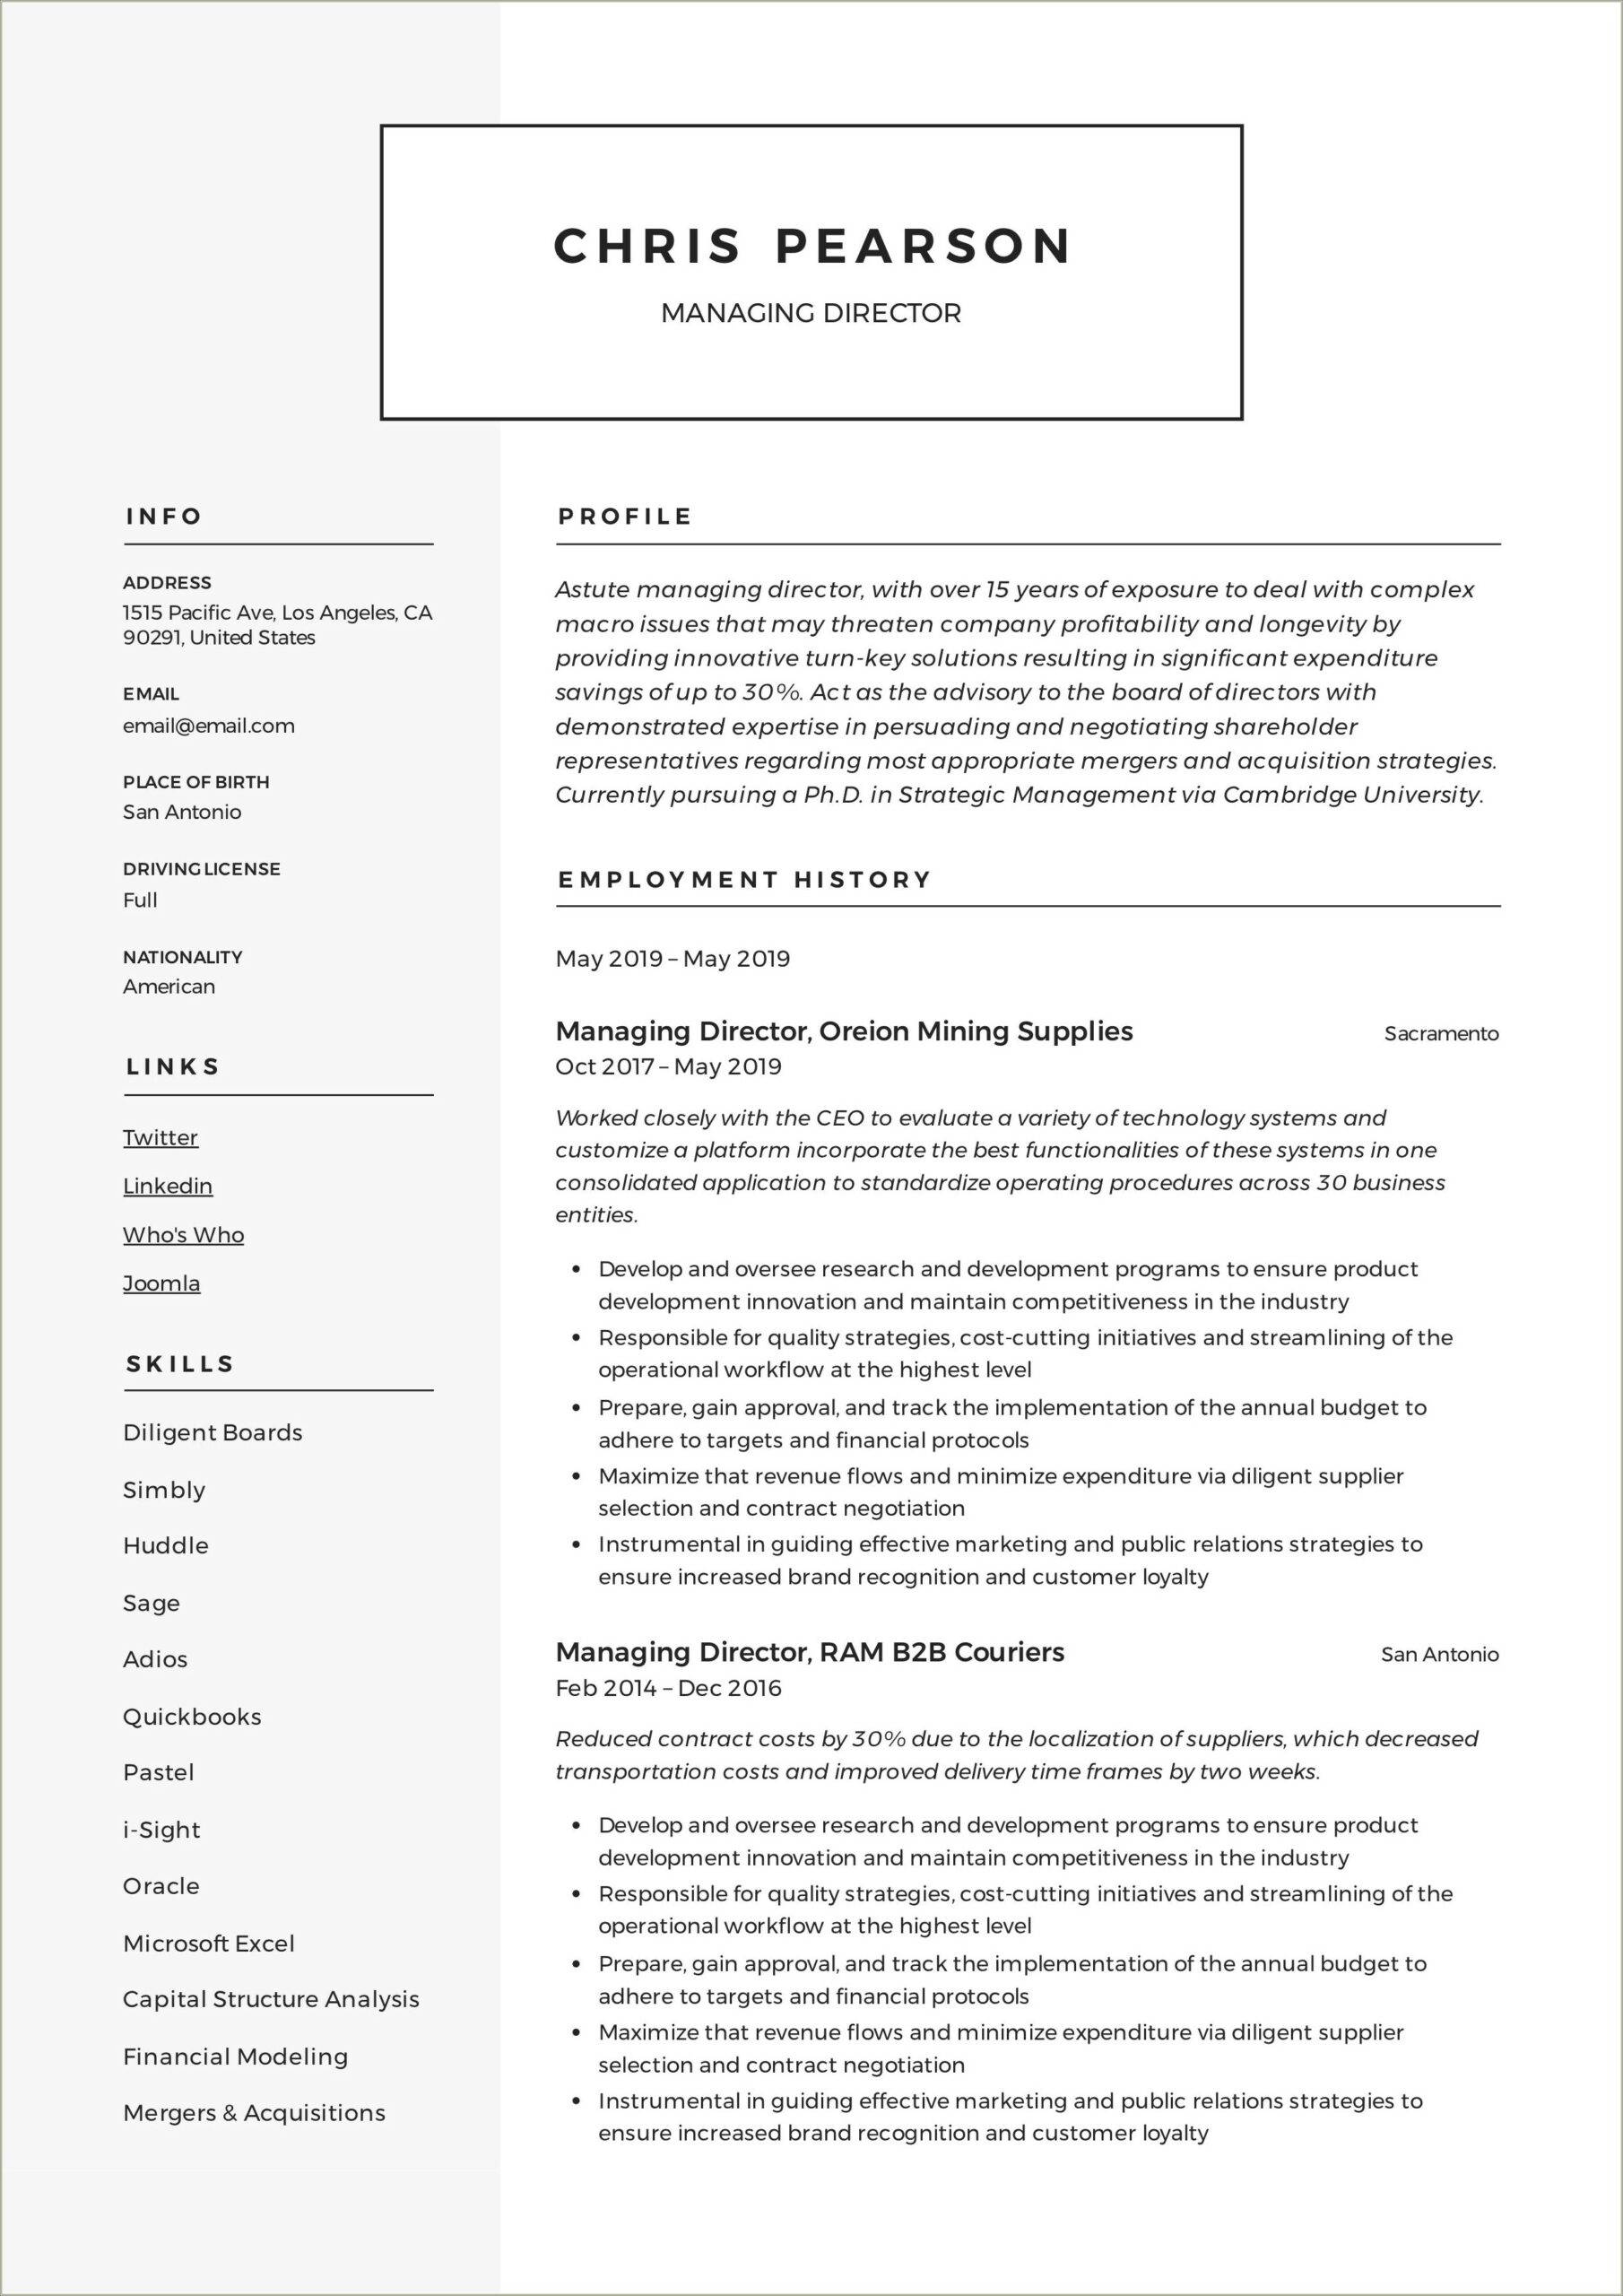 Sample Resume For Board Of Directors Positions